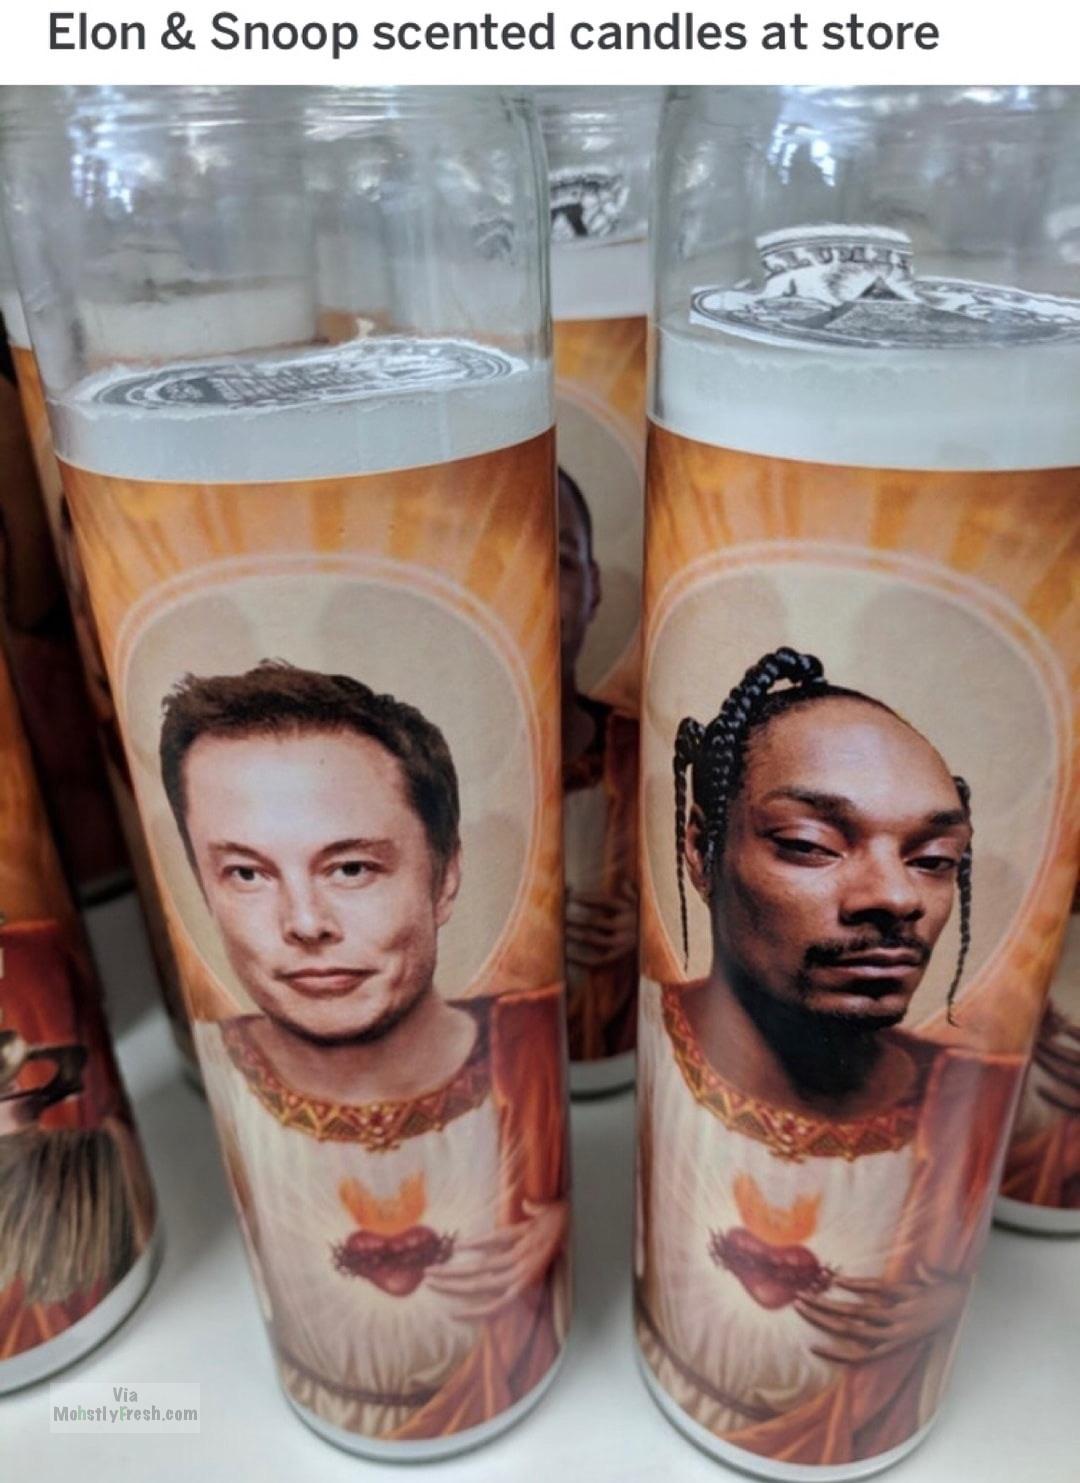 dank meme cup - Elon & Snoop scented candles at store Mohstly Presh.com